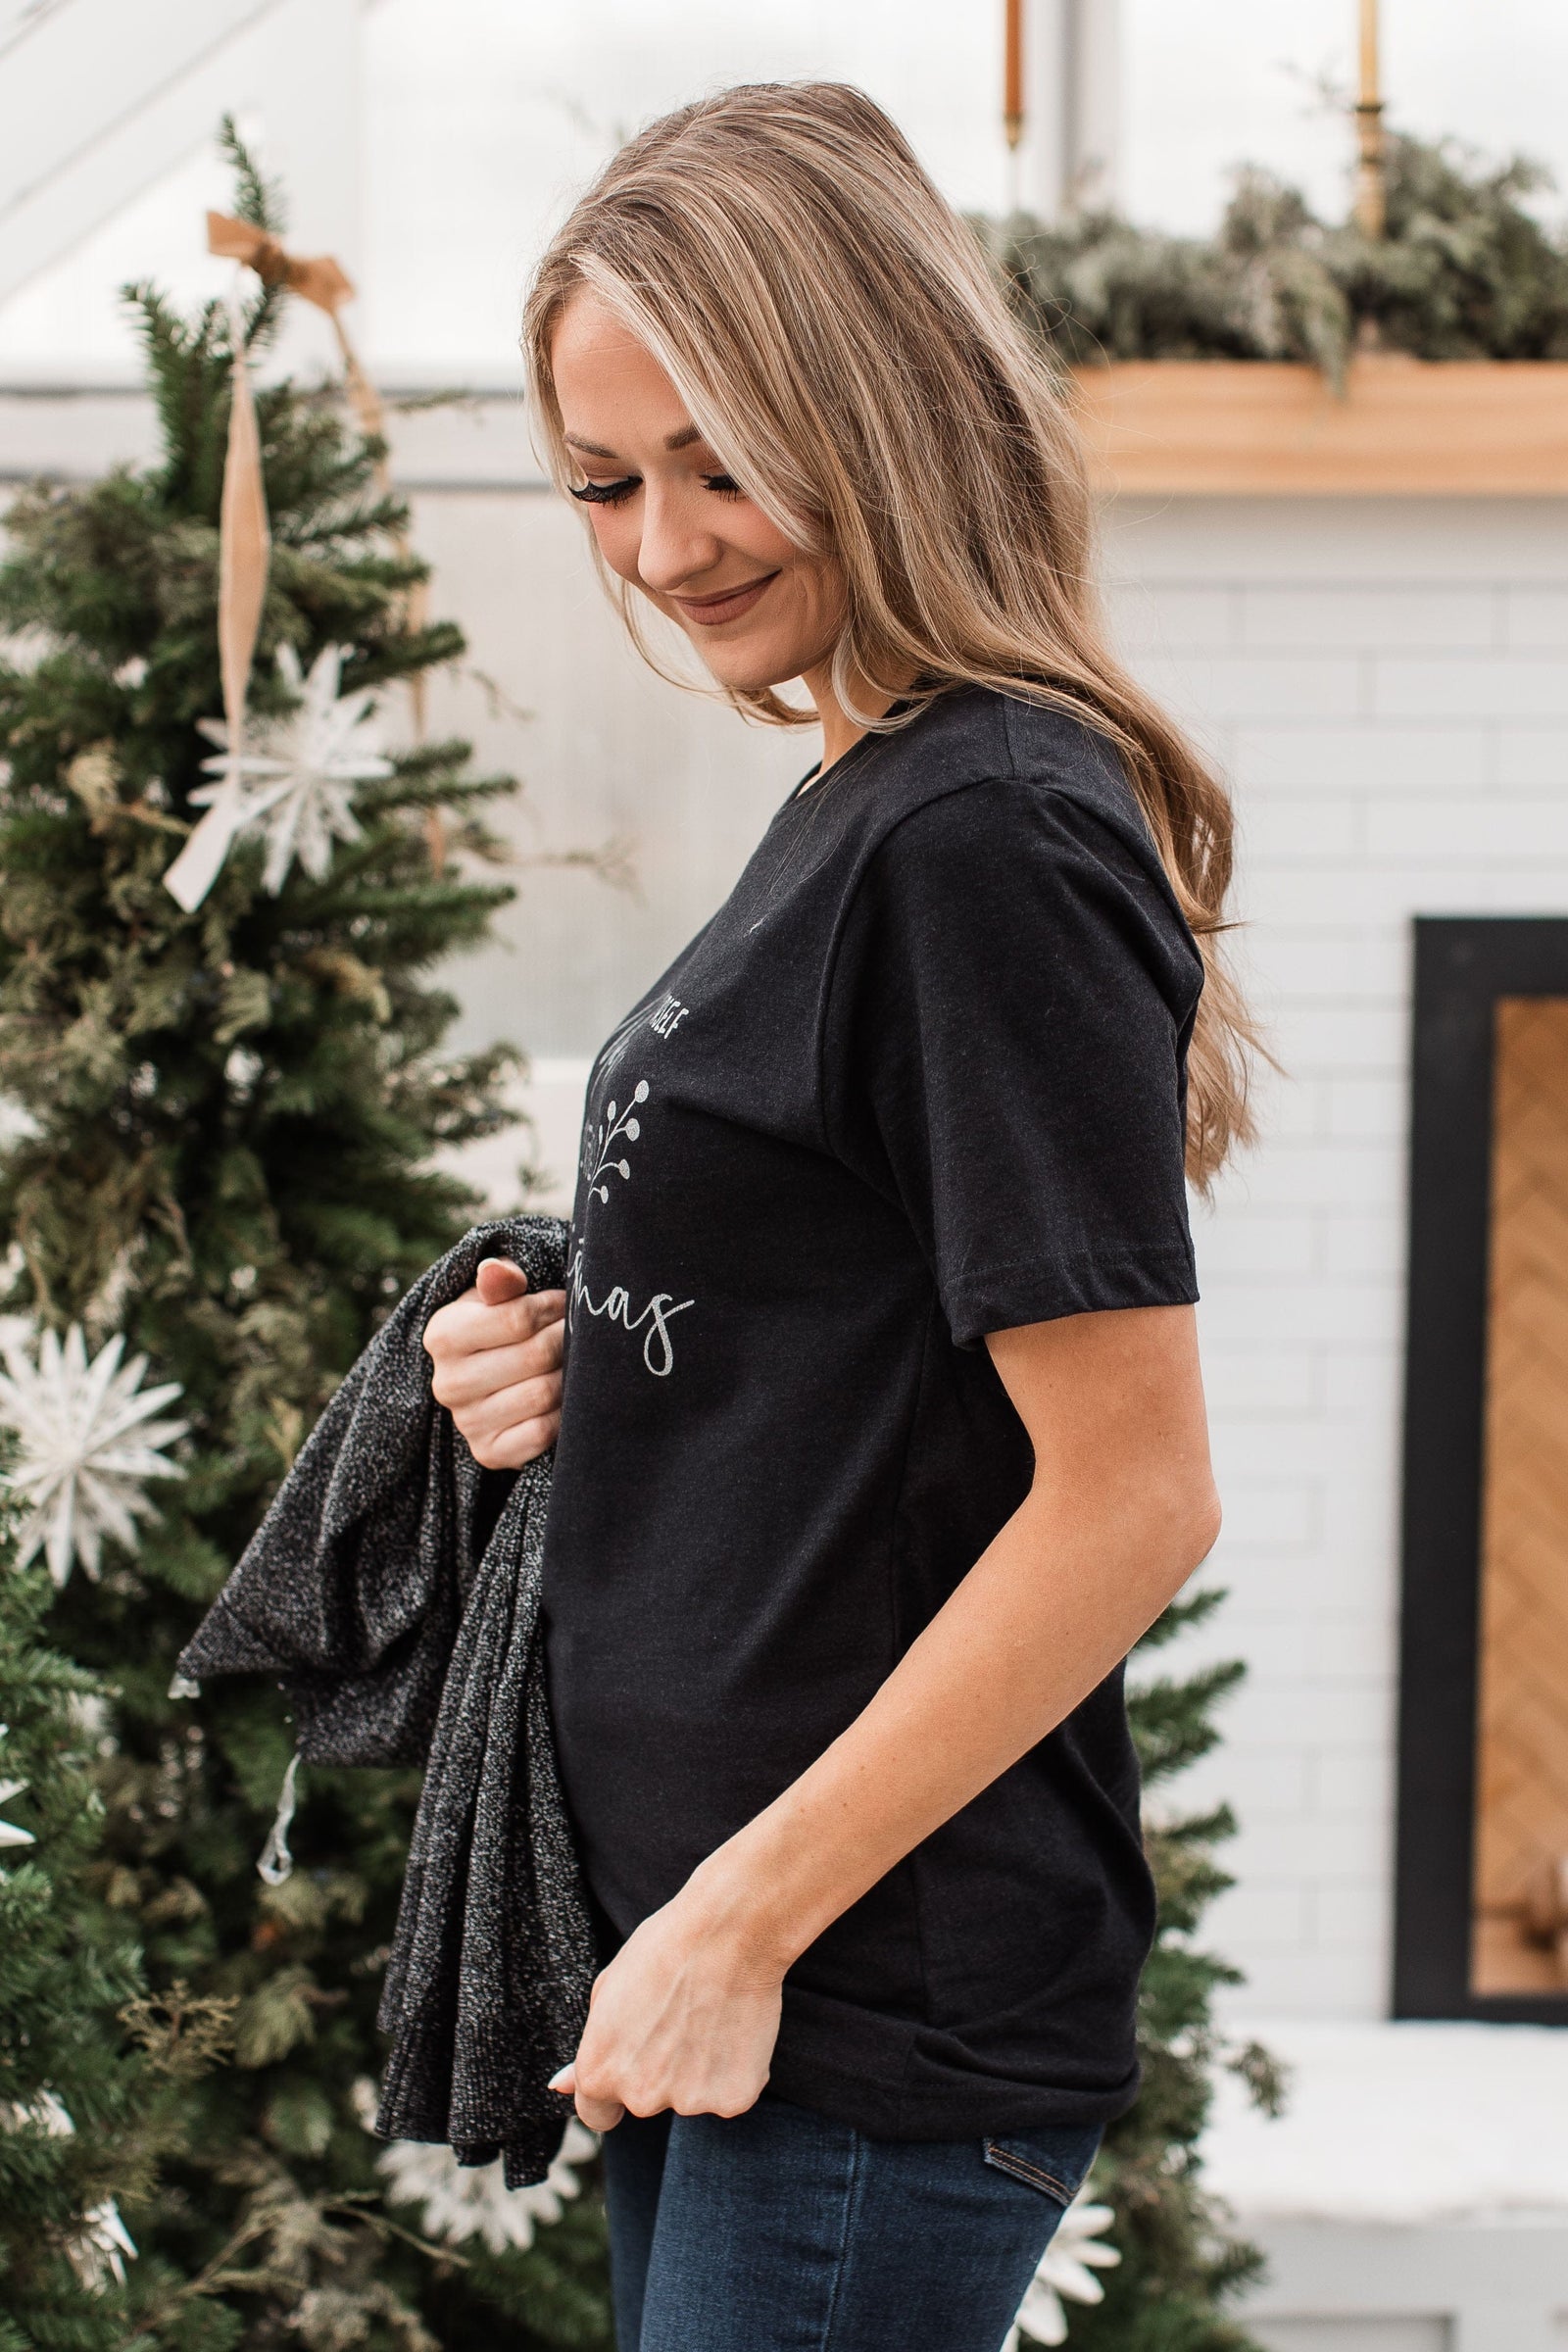 "Have Yourself A Merry Little Christmas" Glitter Graphic Top- Black